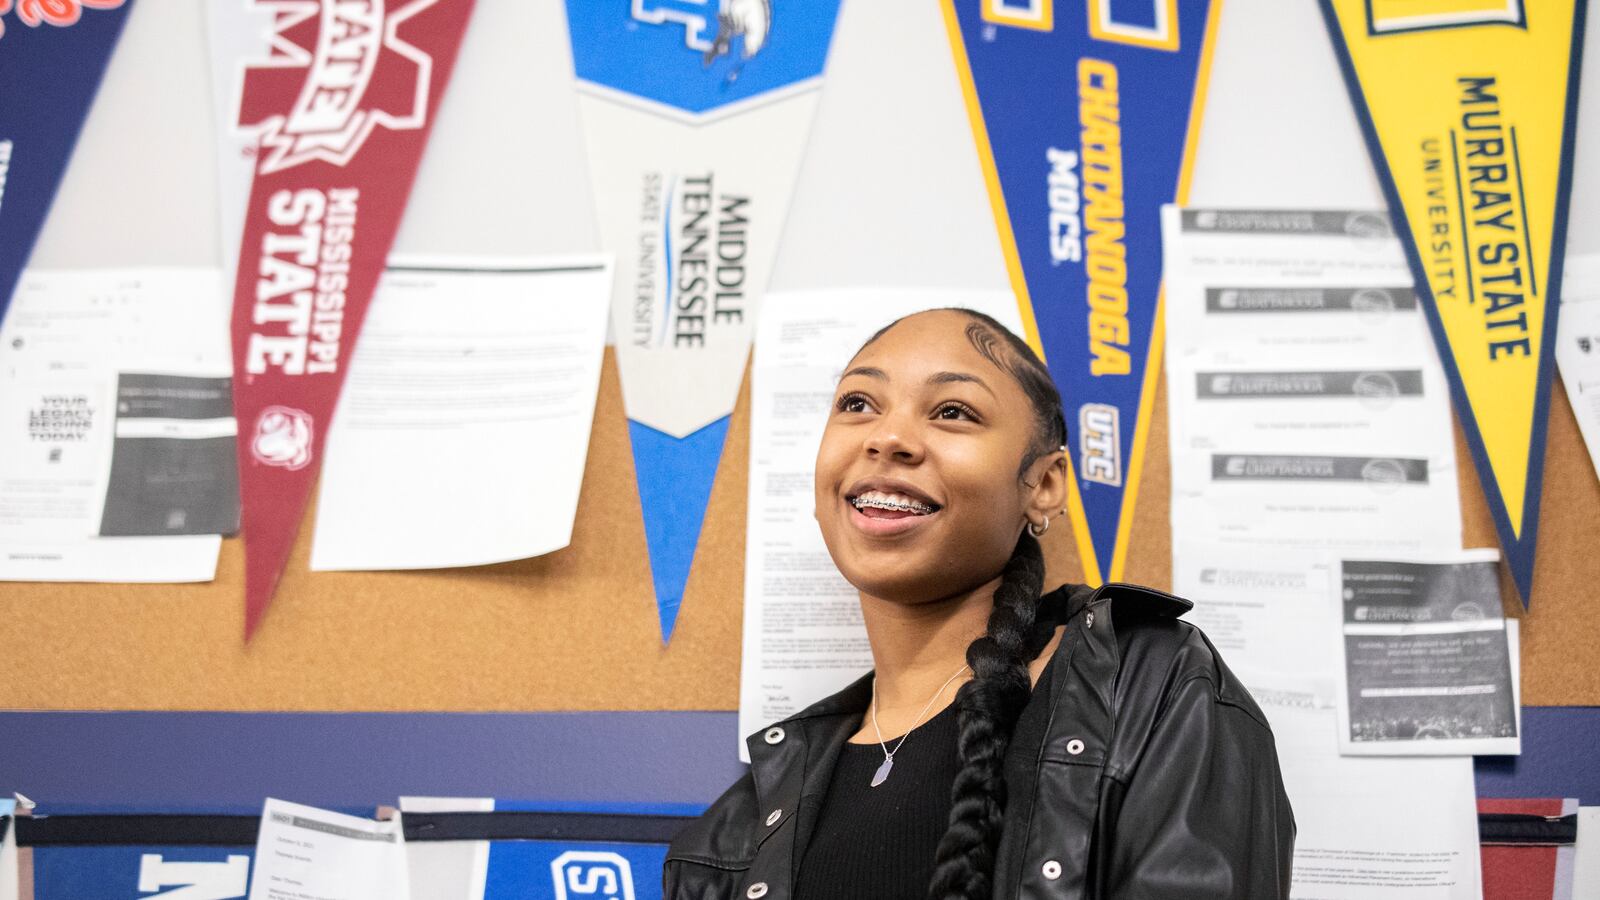 A young woman, wearing a black jacket and shirt and showing rows of braces on her teeth, smiles in front of a classroom wall adorned with college banners.